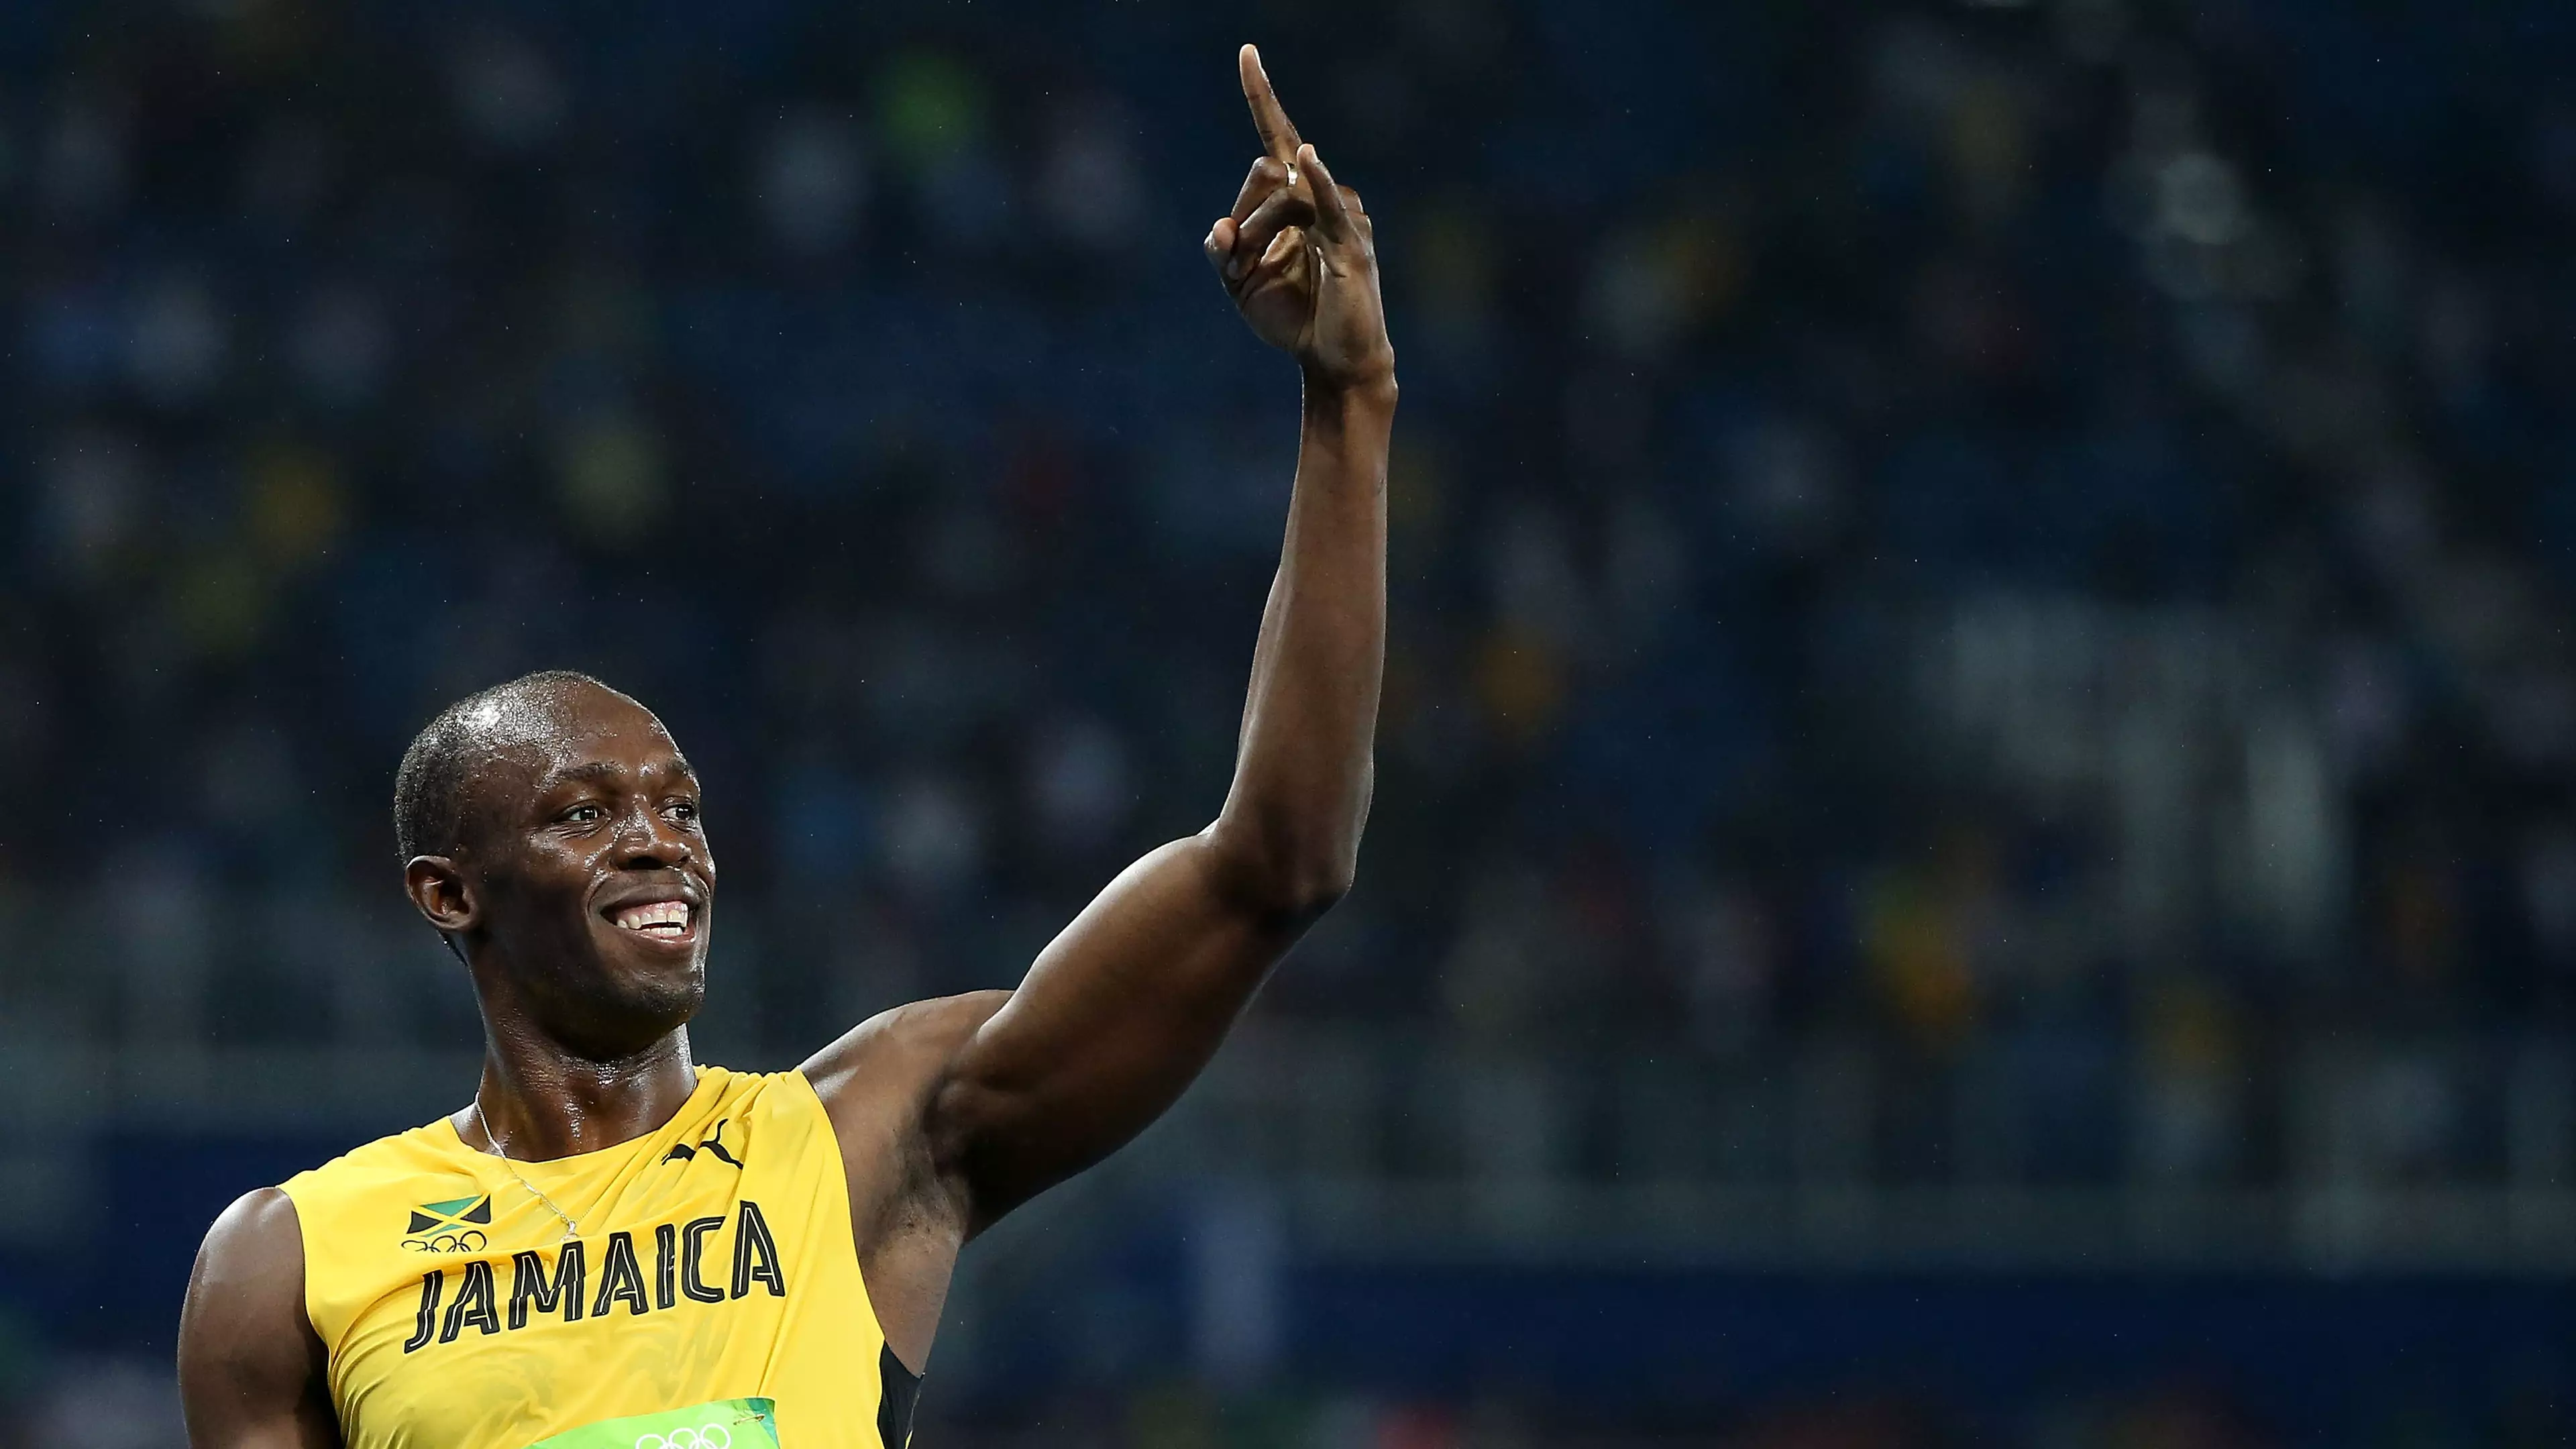 SPORTbible Discusses Usain Bolt With Darren Campbell